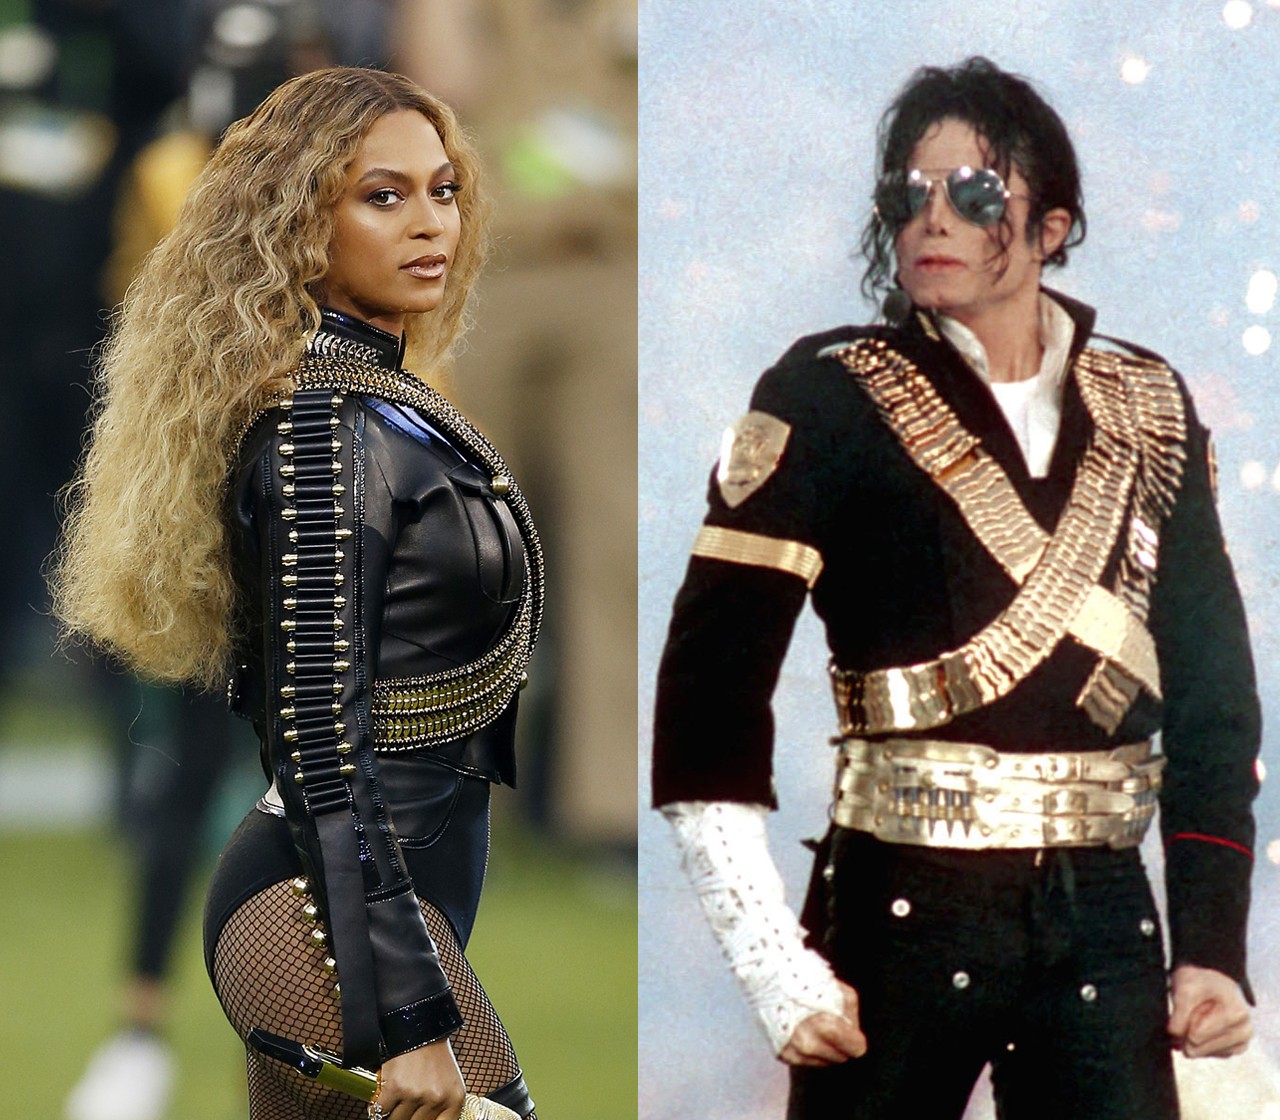 Comparing the performance of Michael Jackson with beyonce is like comparing the BEAUTY of ALEX with that of bobrisky